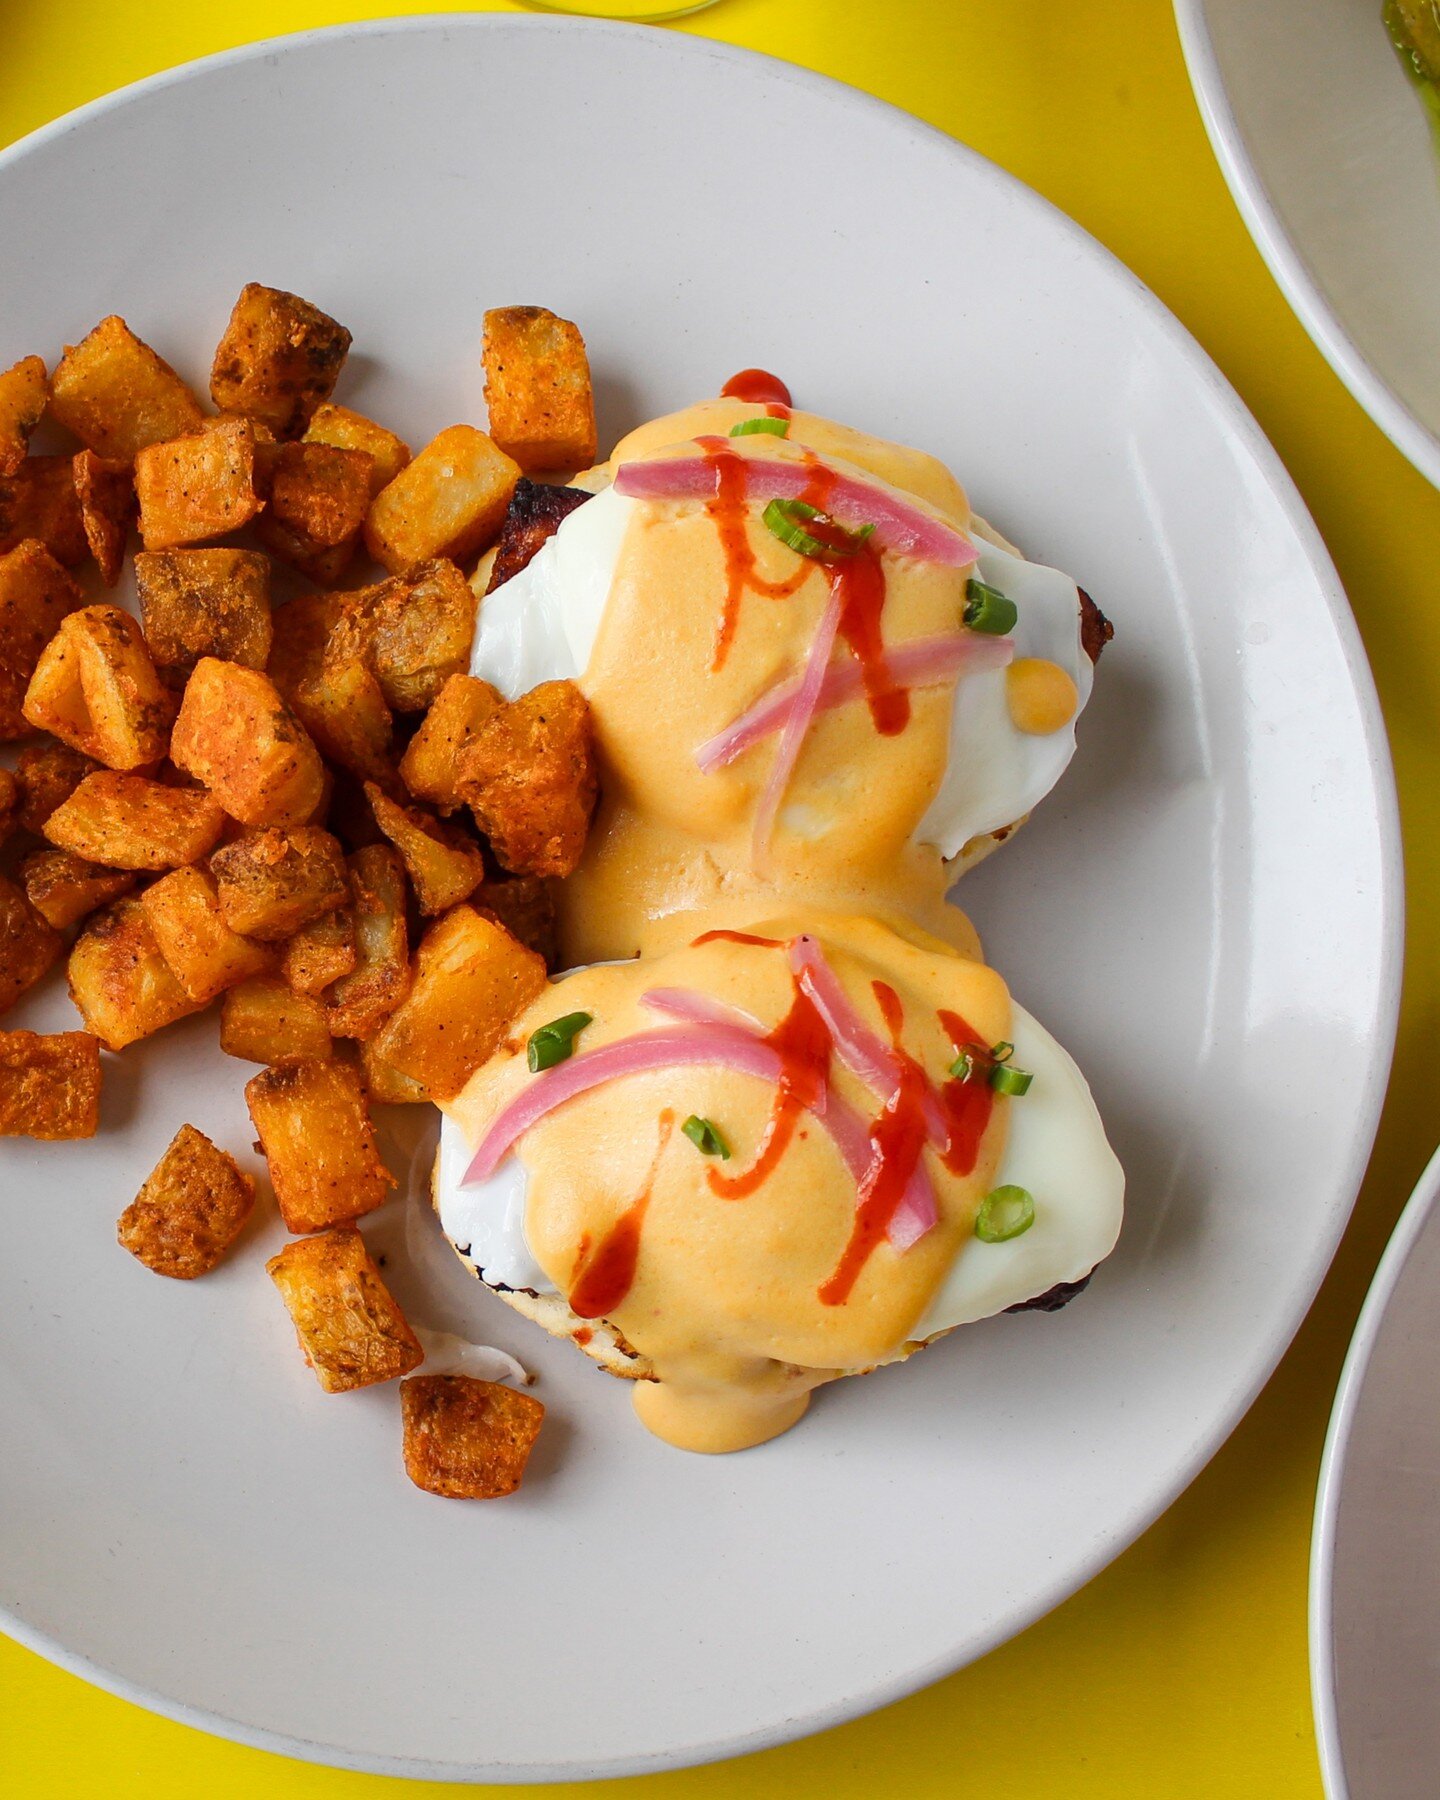 We've got a new beni on our Albany* location's menu that you're going to love.. a braised bacon steak benedict - braised bacon steak, biscuit, poached eggs, pickled red onion, with a delicious siracha maple hollandaise. Yum 😍